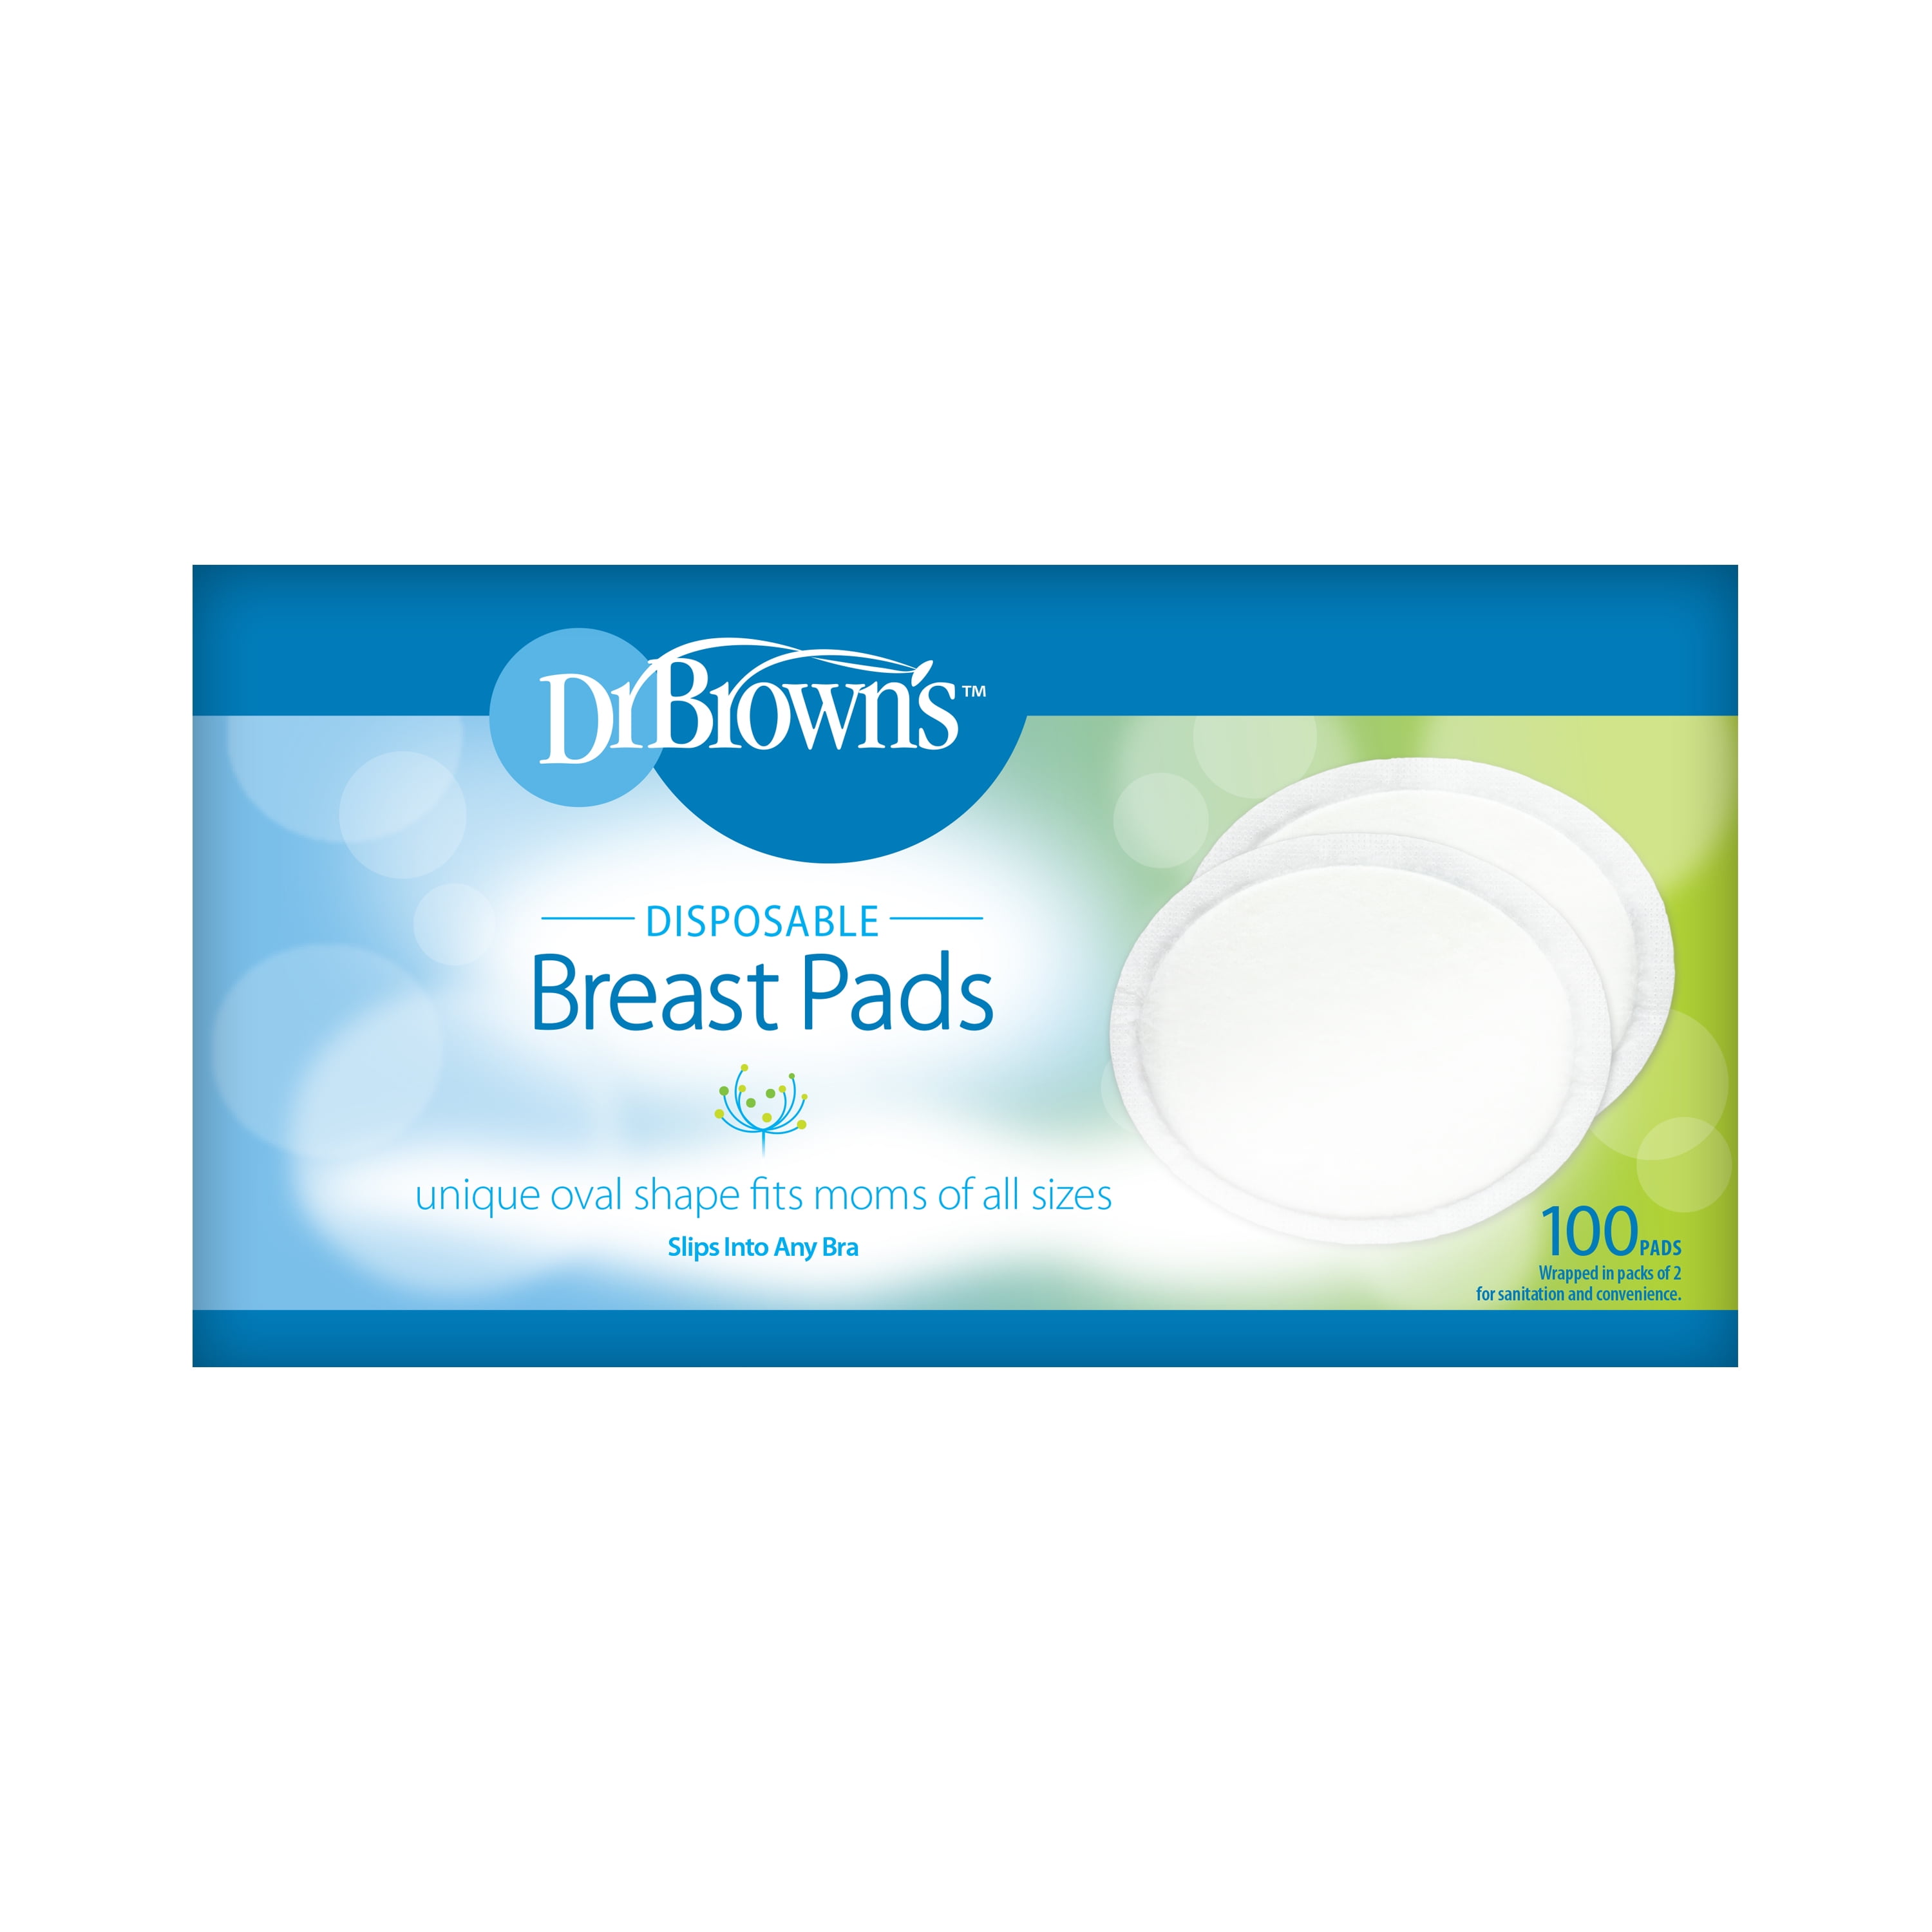 Kiinde Expression Disposable Breast Pad, to Promote Lactation and Soothe - 100 Pack